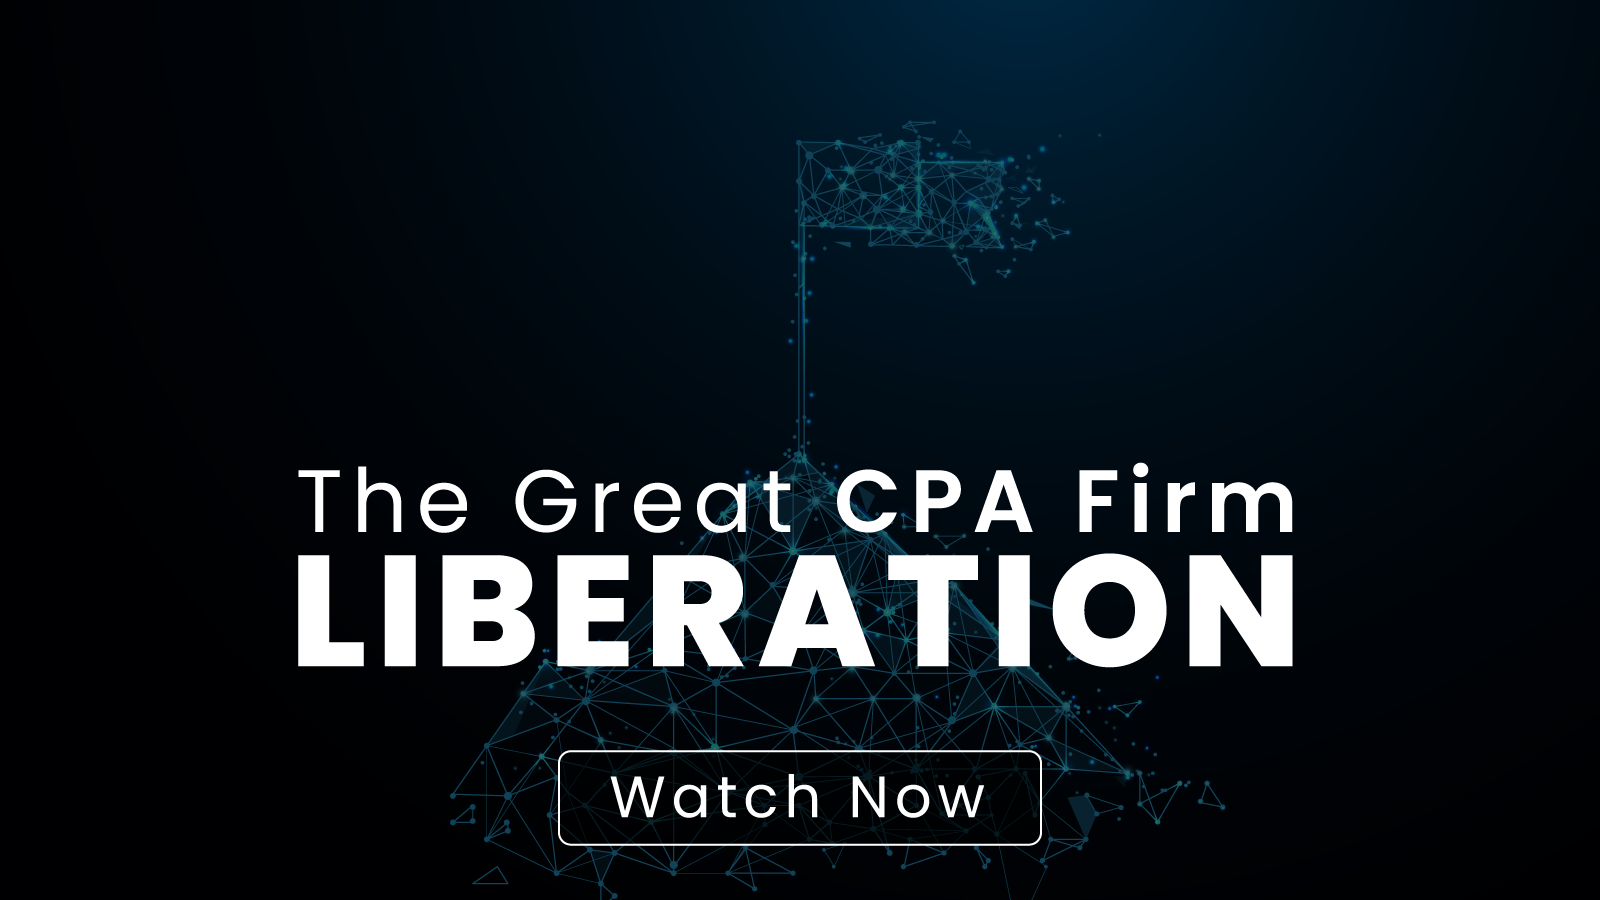 The Great CPA Firm Liberation